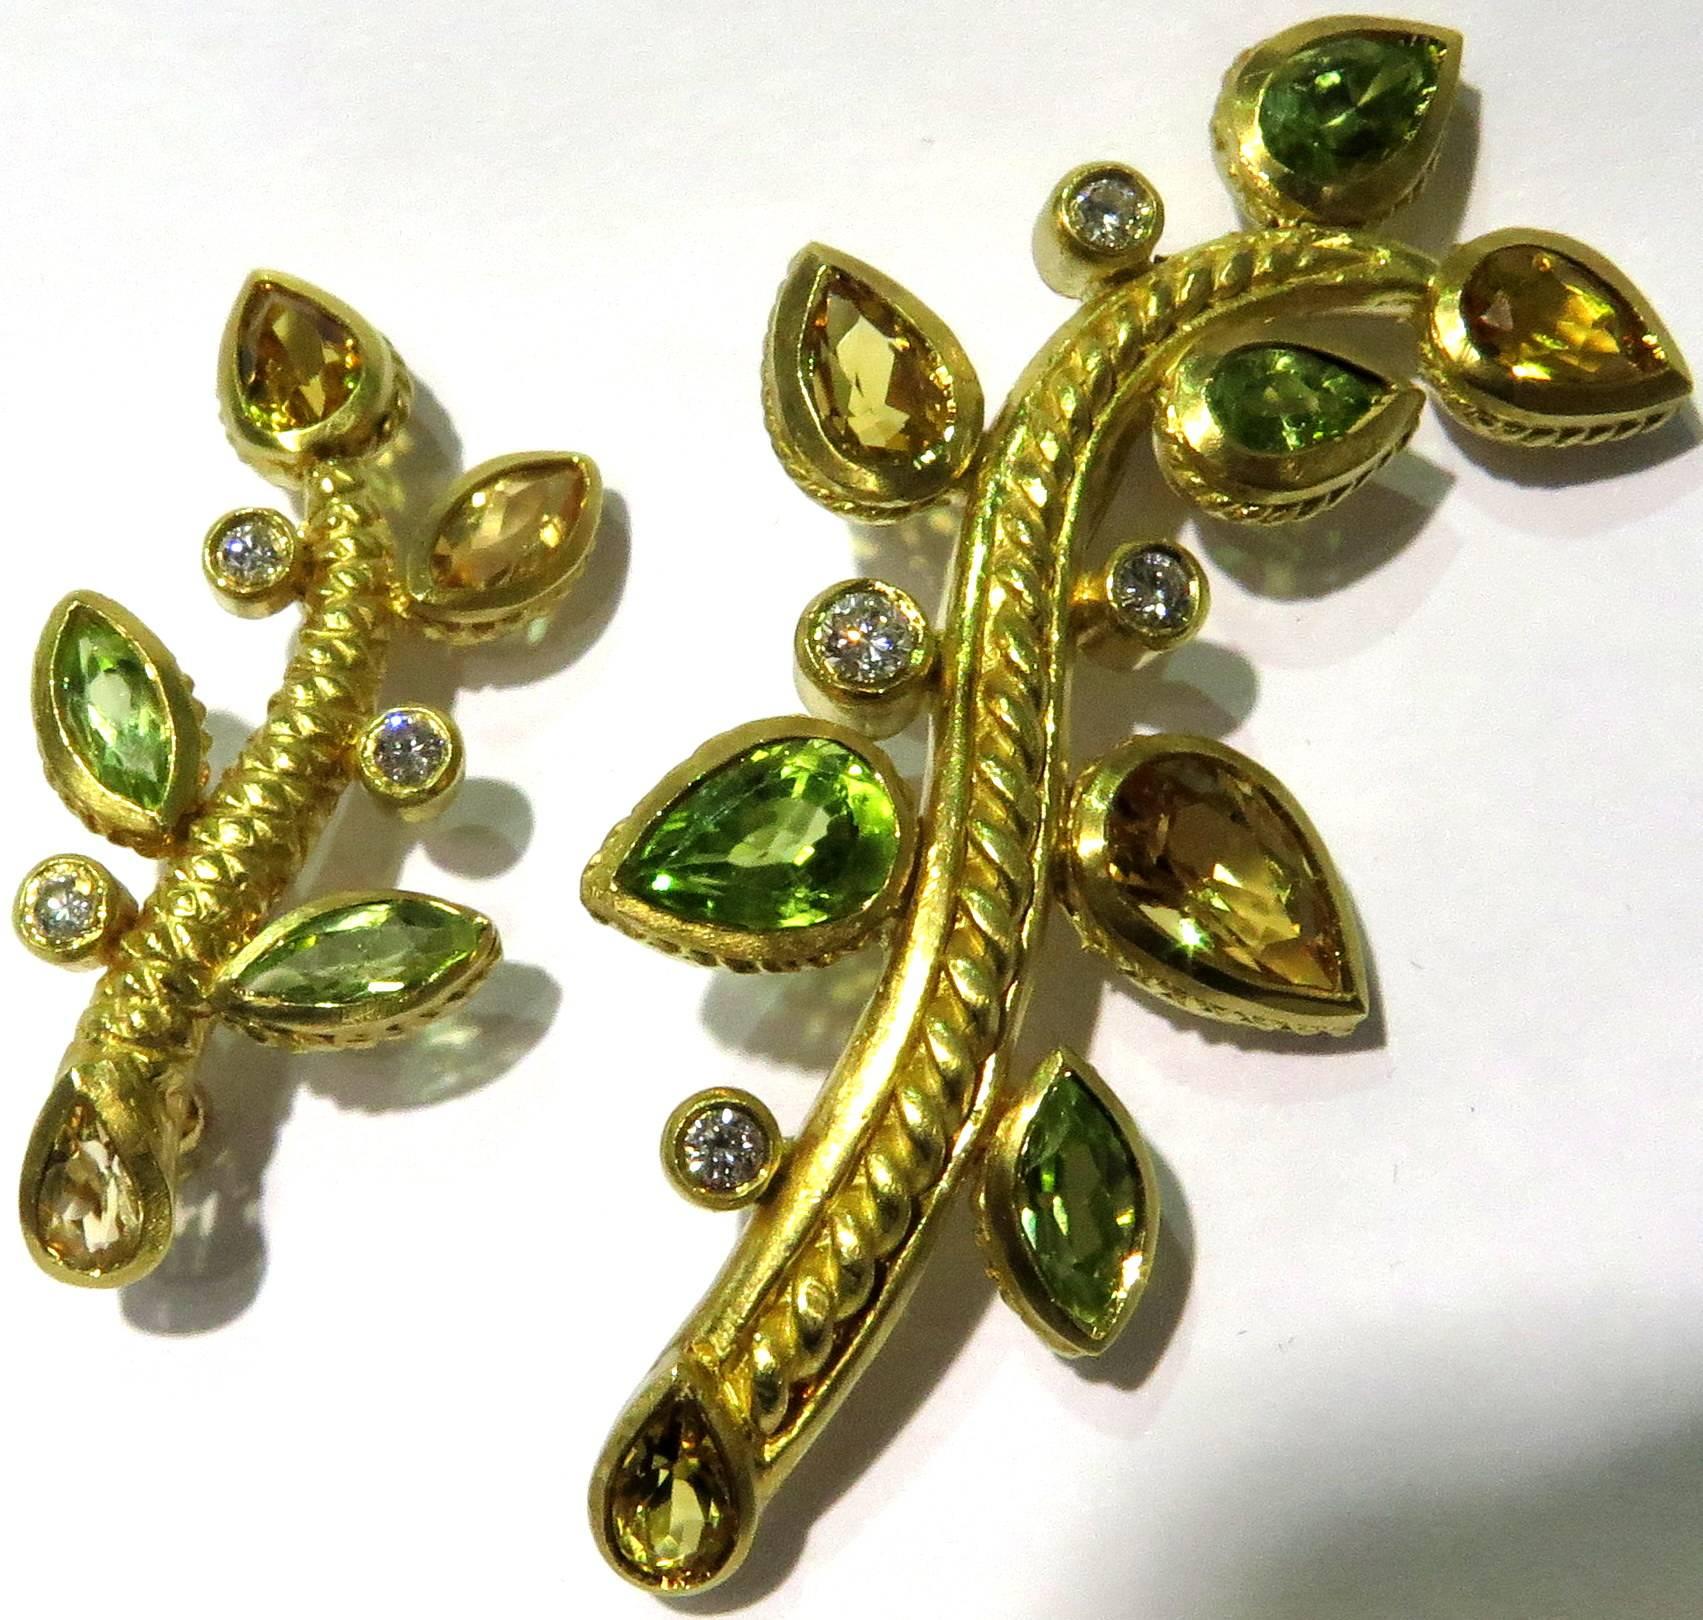 These 2 pins by Judith Ripka are in 18k yellow gold. They are both in a branch motif with yellow beryls and peridots, accented with diamonds. 
The smaller pin measures 1 3/8 inch high by 5/8 inch wide.
The larger pin measures 2 inches high by 1 inch